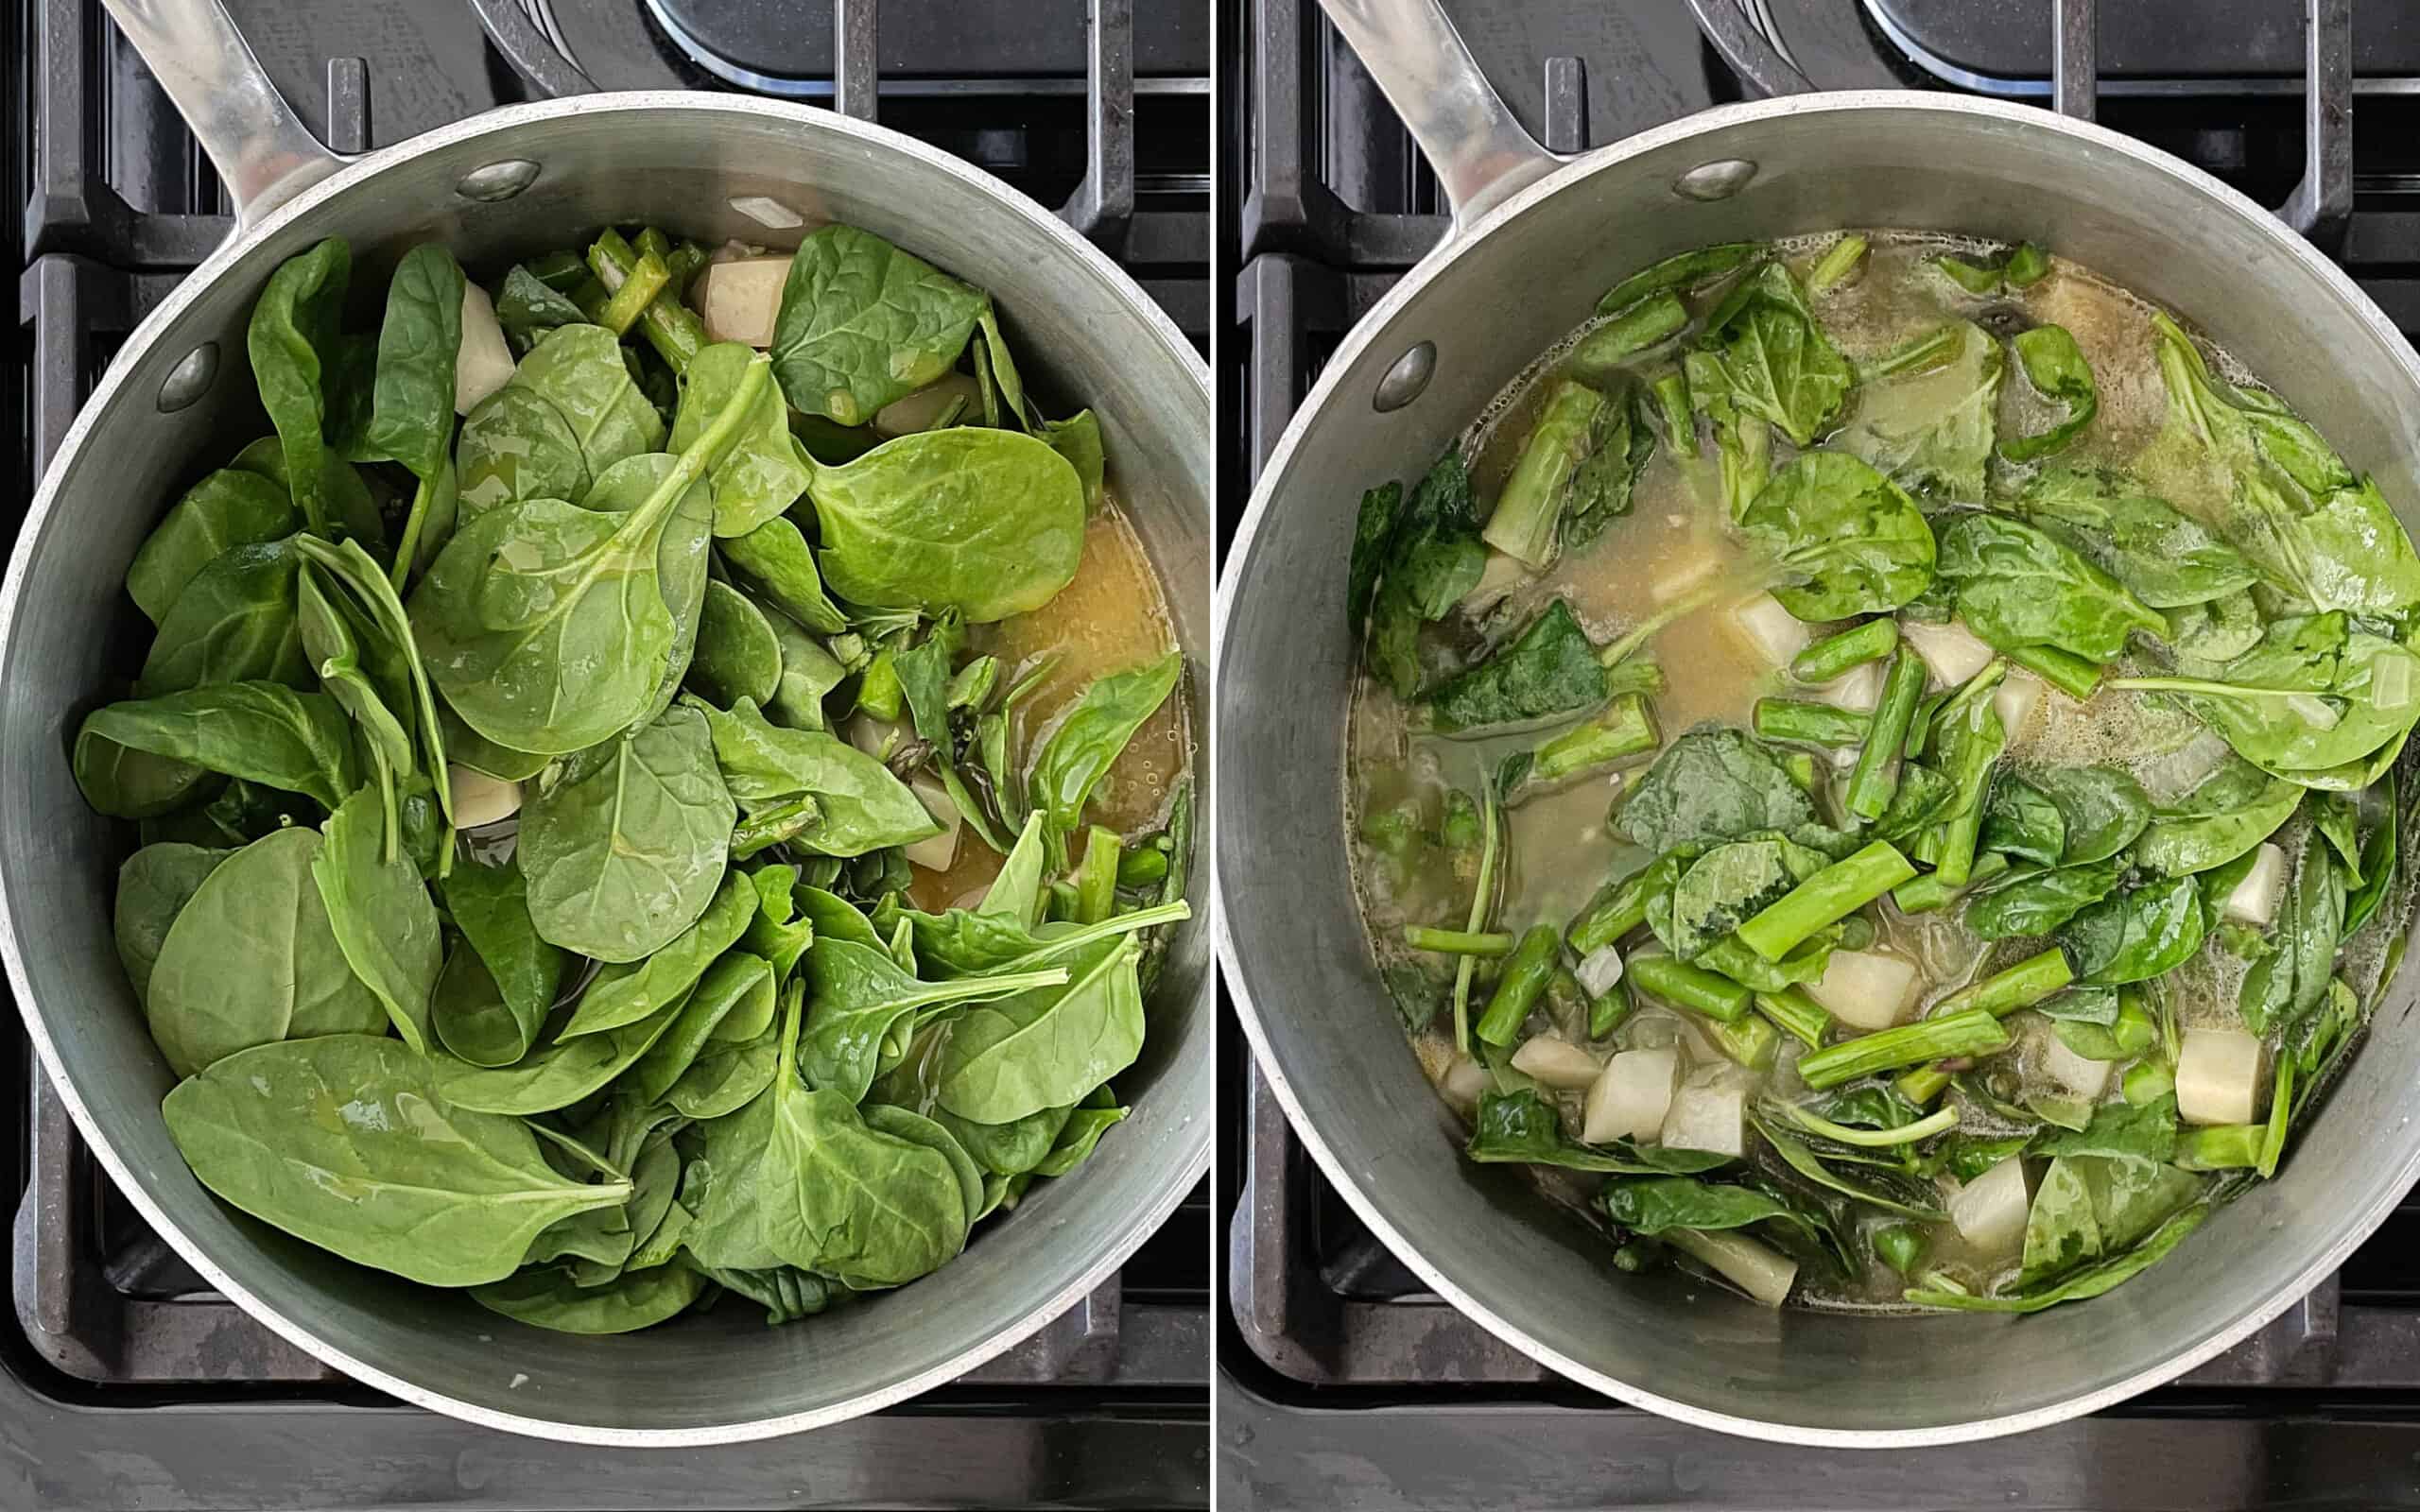 Simmering the soup in a pot before and after spinach wilts.